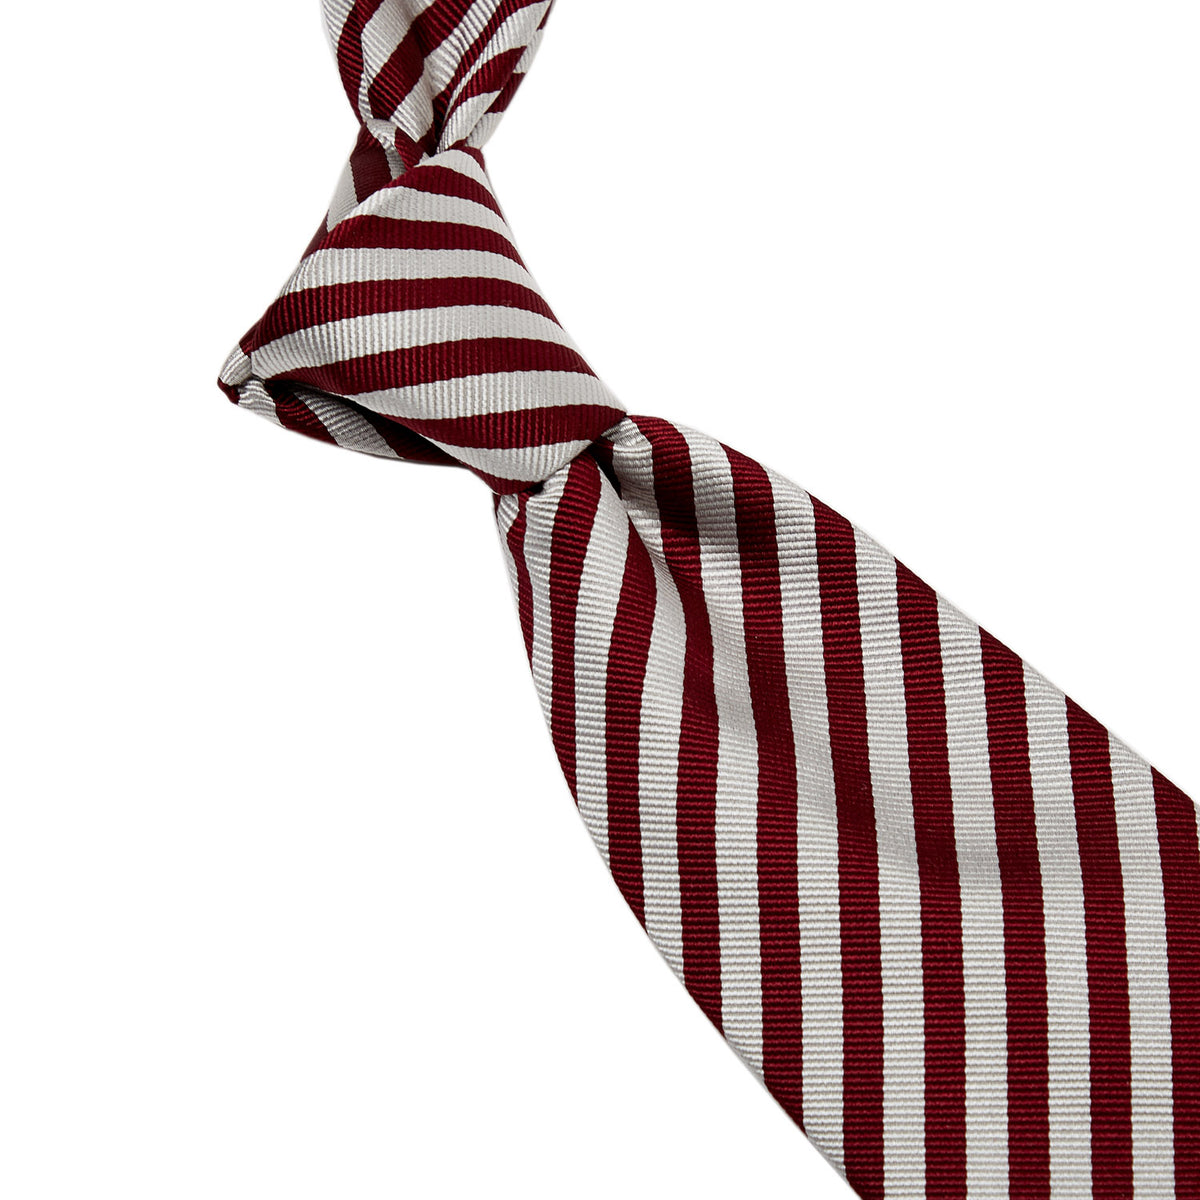 A Sovereign Grade Burgundy and Silver London Stripe Silk Tie by KirbyAllison.com, handmade in United Kingdom, on a white background.